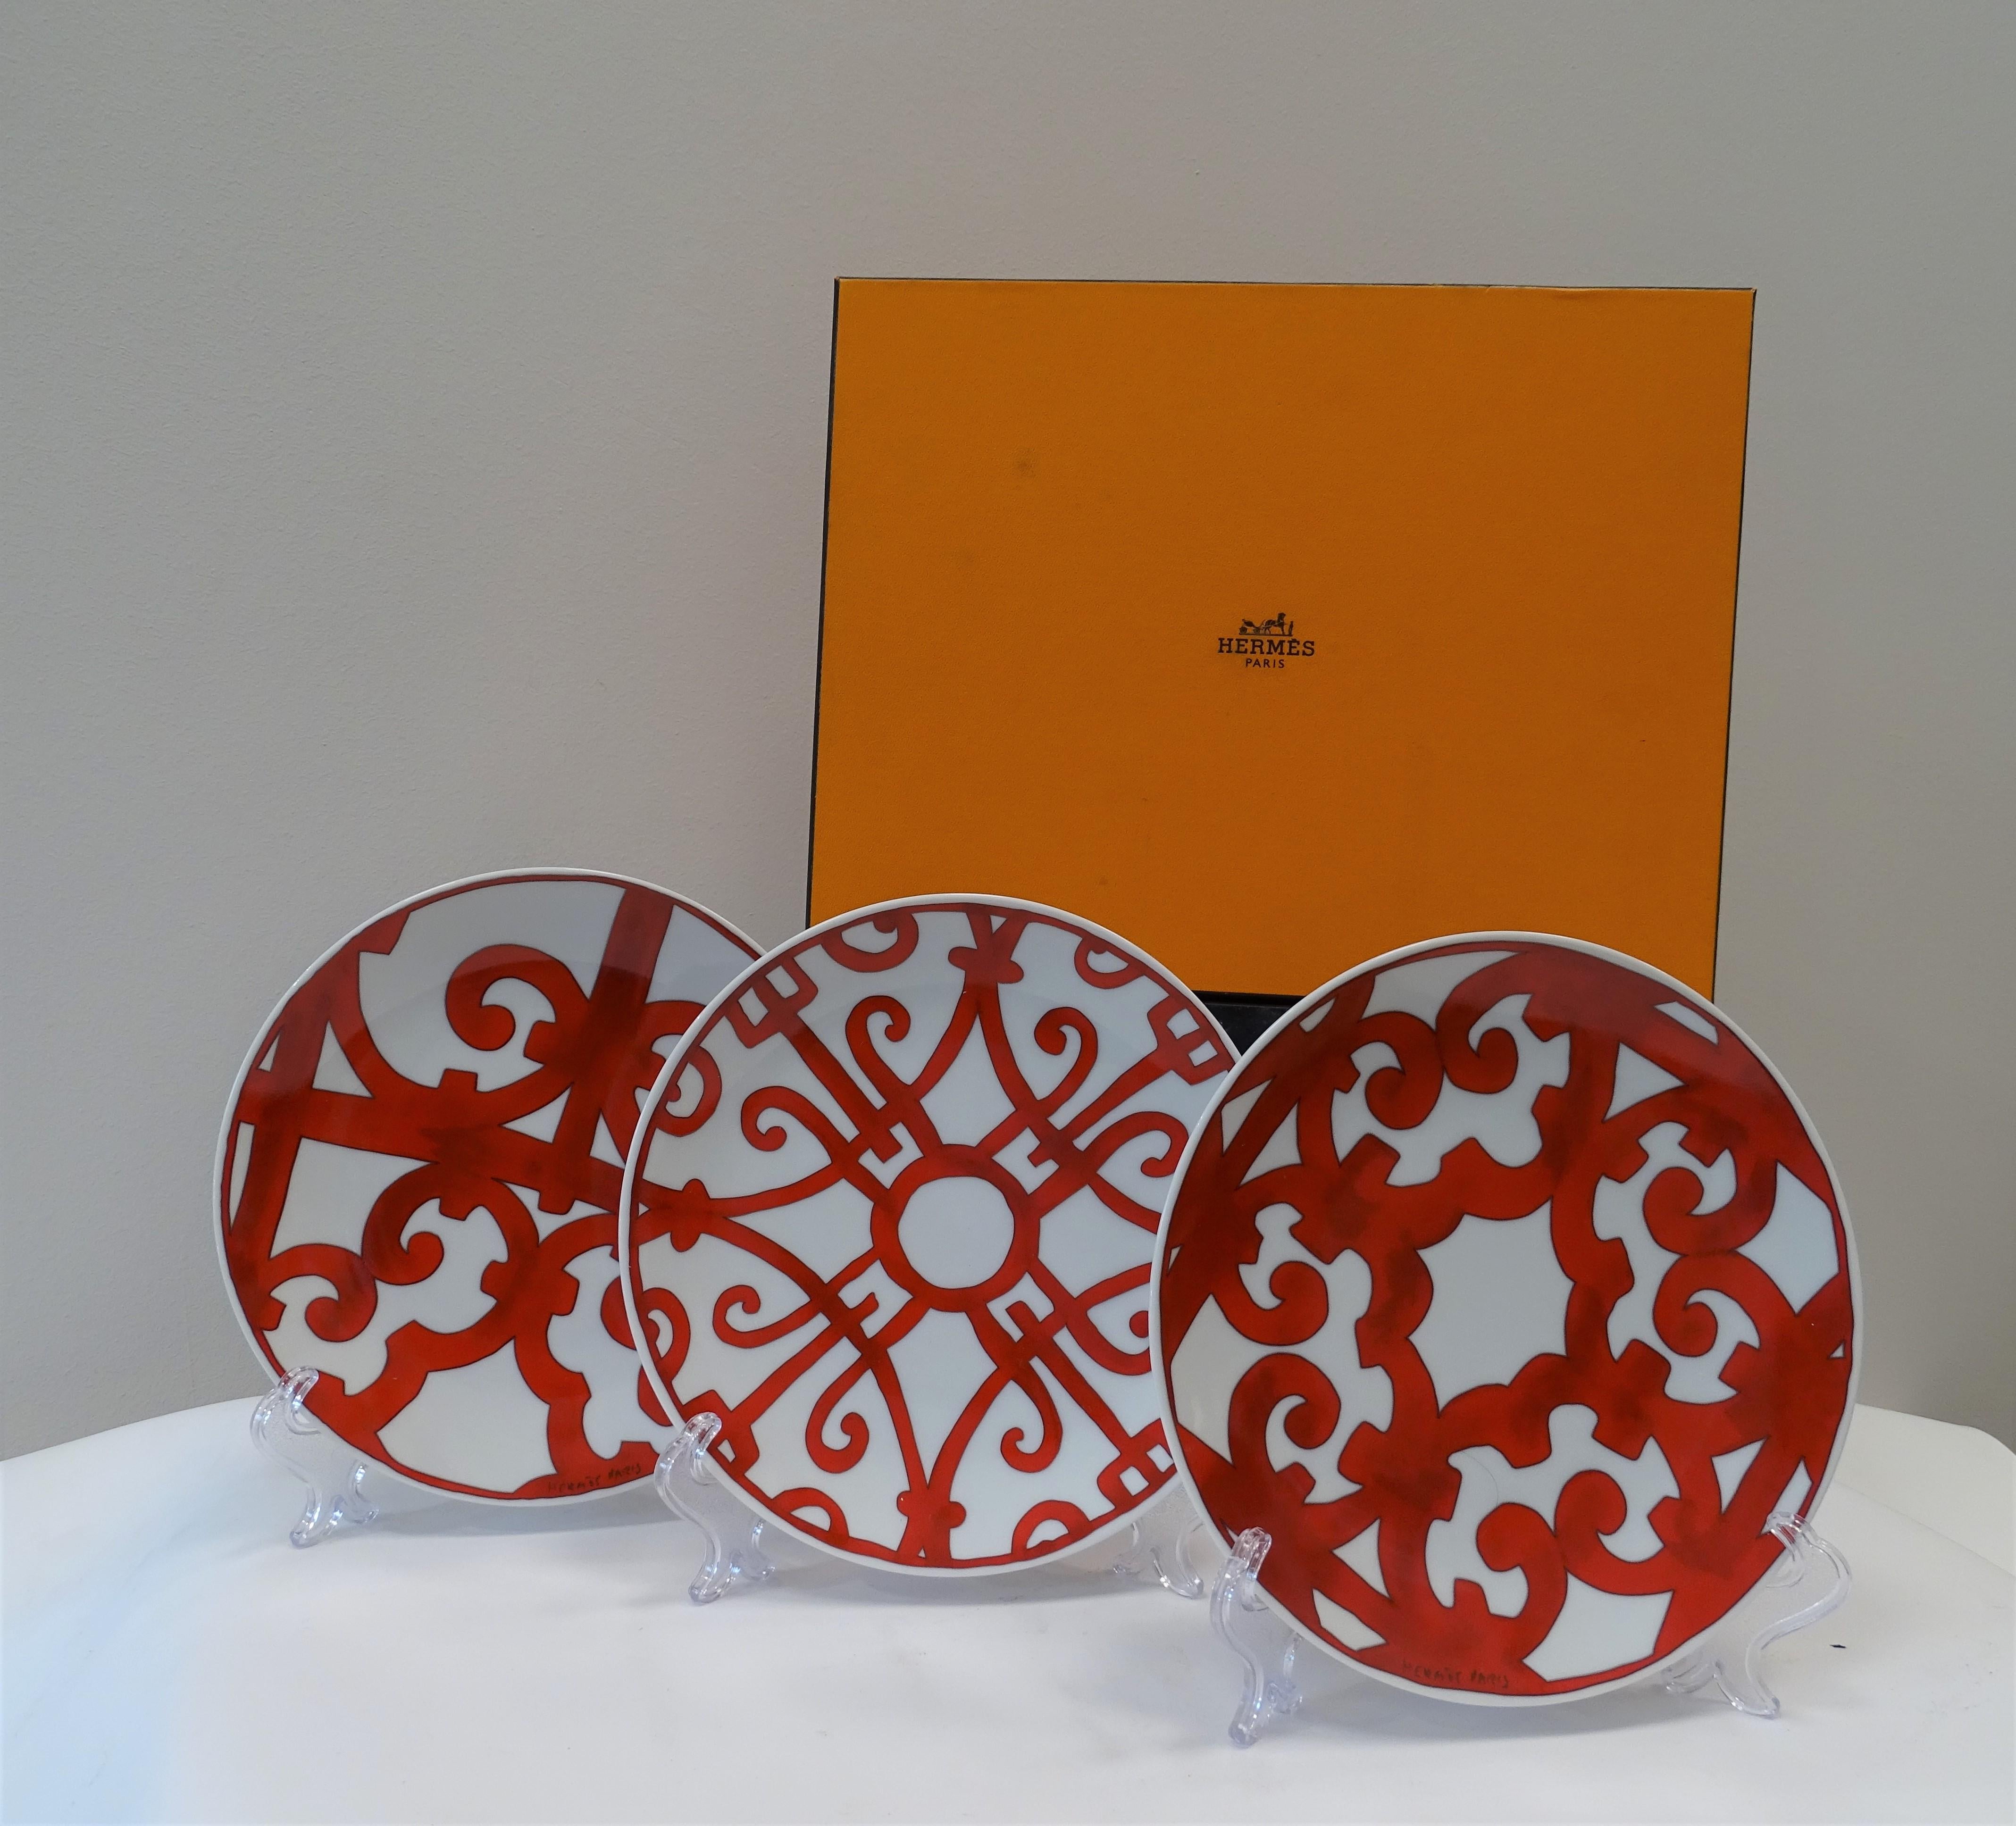 Hermes Set of Orange 3 Dishes, with the Box 12